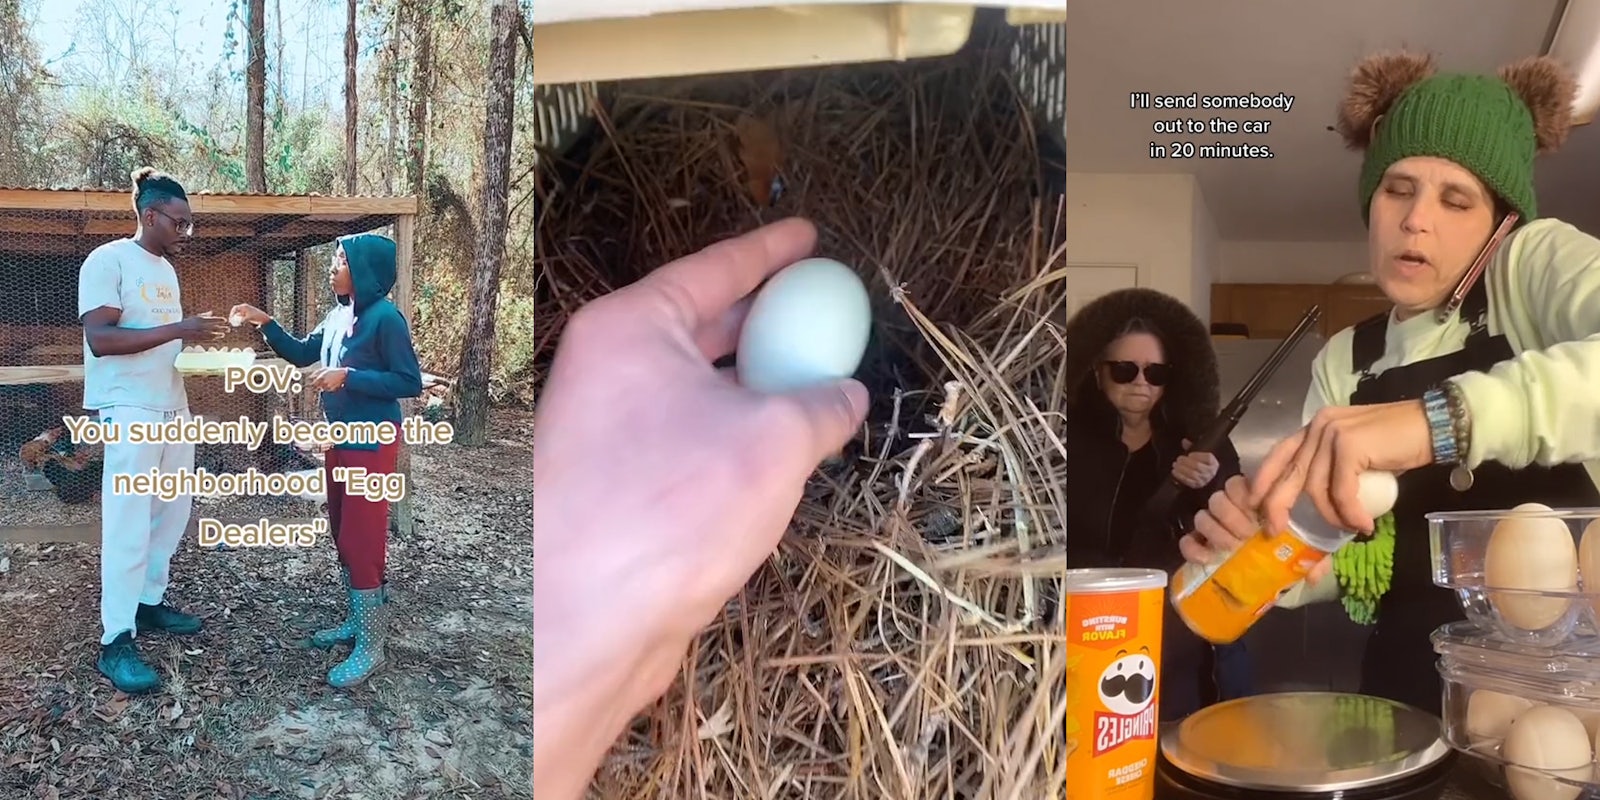 people outside holding eggs in front of chicken coop with caption 'POV: You suddenly become the neighborhood 'Egg Dealers'' (l) person grabbing egg from chicken coop (c) person on phone holding egg while other person stands behind with gun and caption 'I'll send somebody out to the car in 20 minutes.' (r)